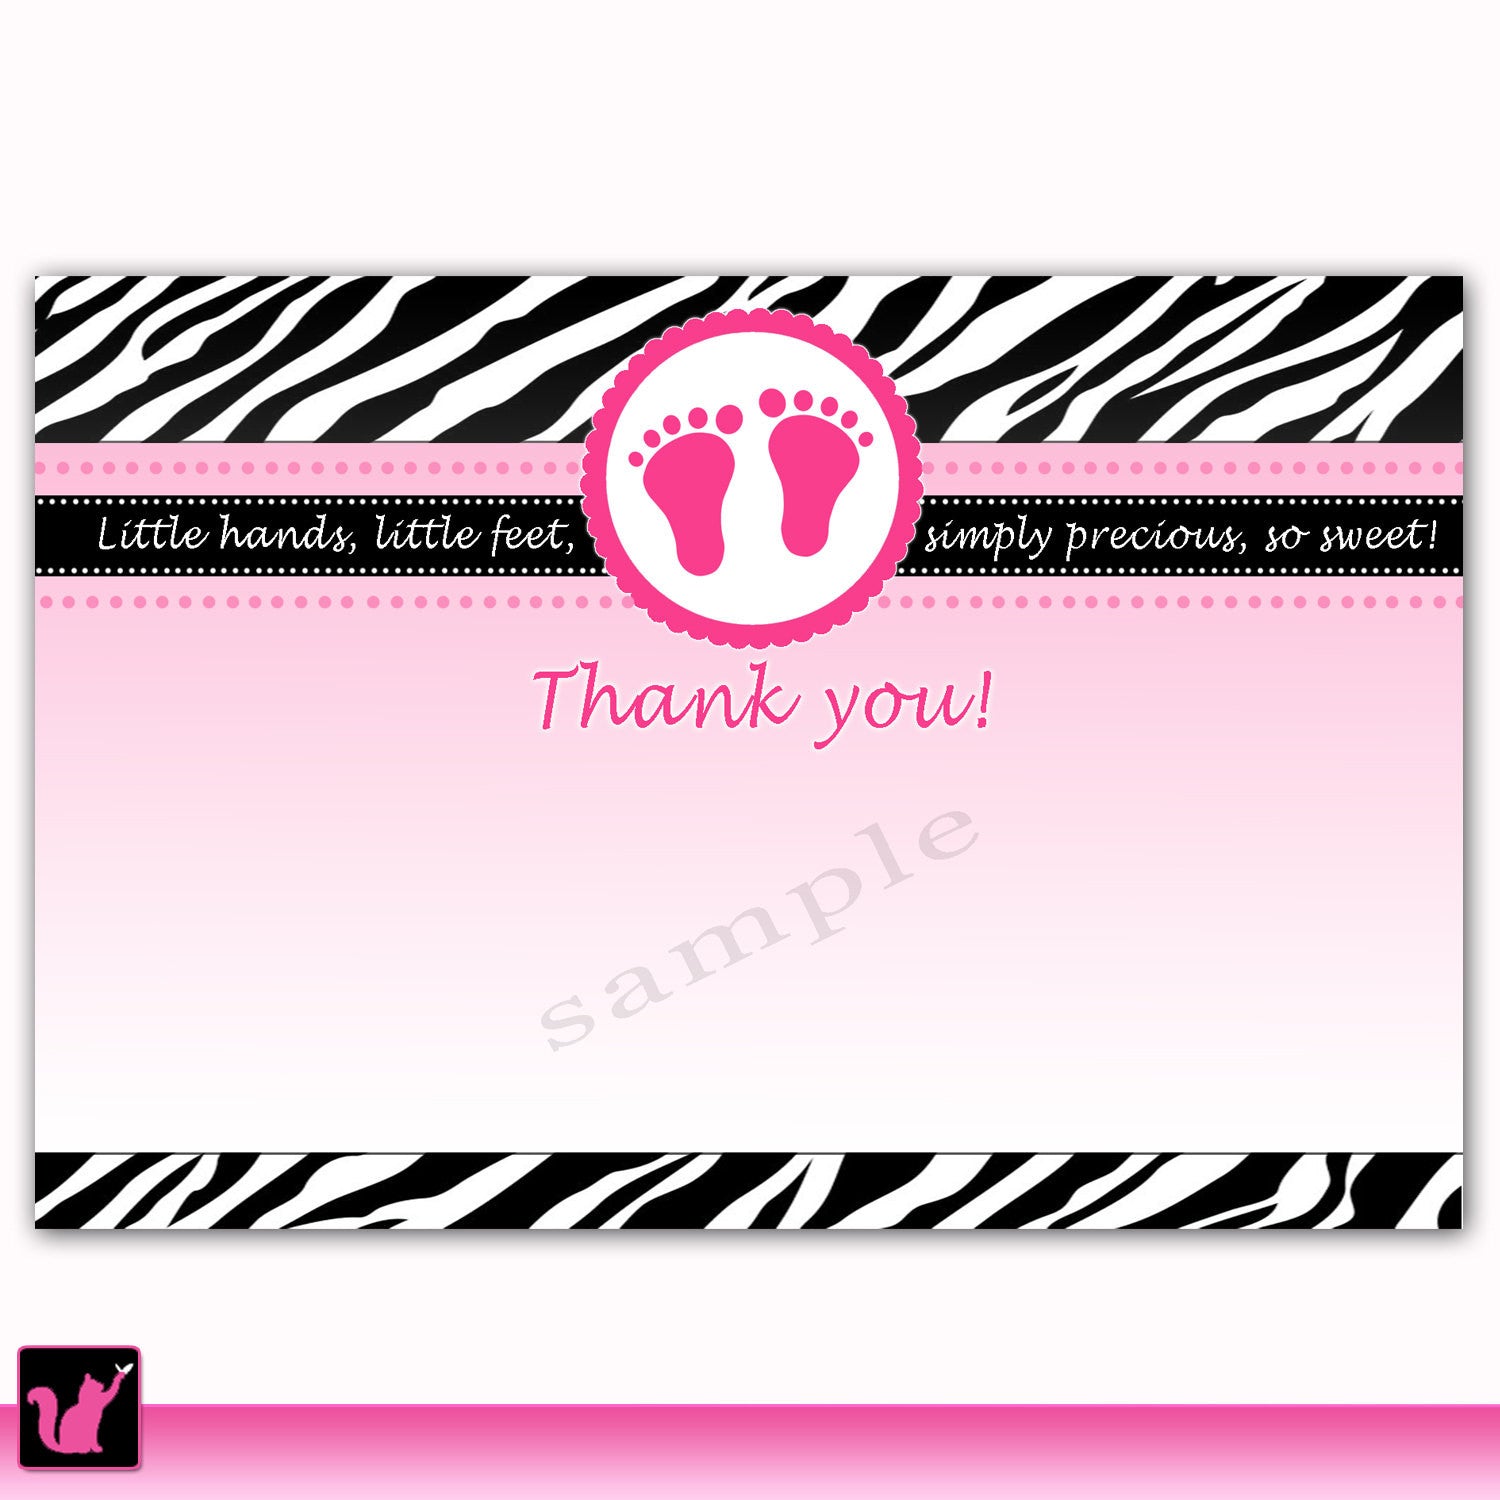 INSTANT DOWNLOAD Zebra Baby Shower Blank Thank You Card - Pink Baby Feet Baby Shower Announcement Baby Shower Favors Baby Shower Items